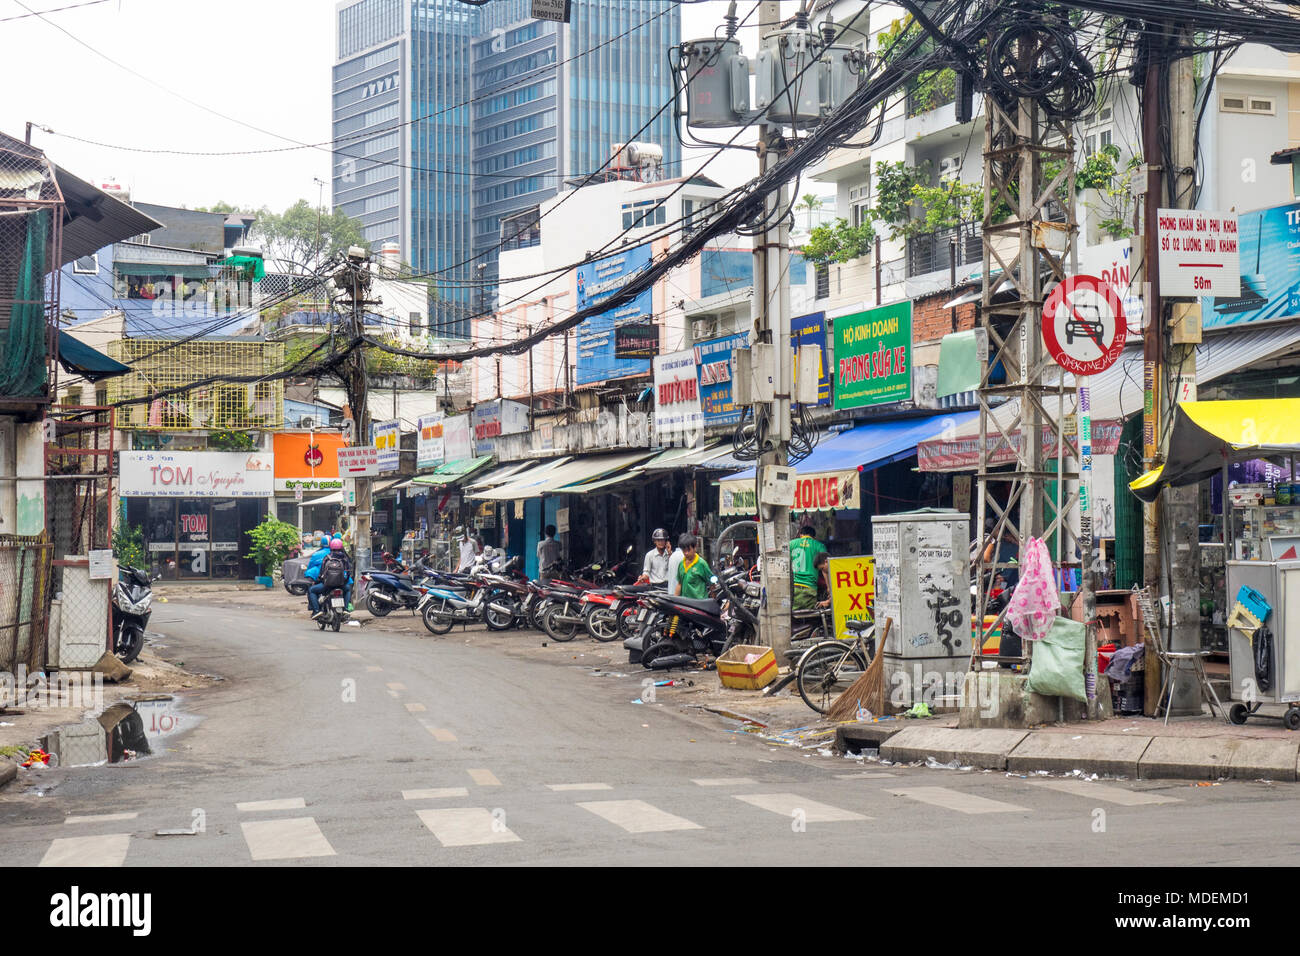 A tangle of overhead power lines and a short street with parked motorbikes and shops in Ho Chi Minh City, Vietnam. Stock Photo